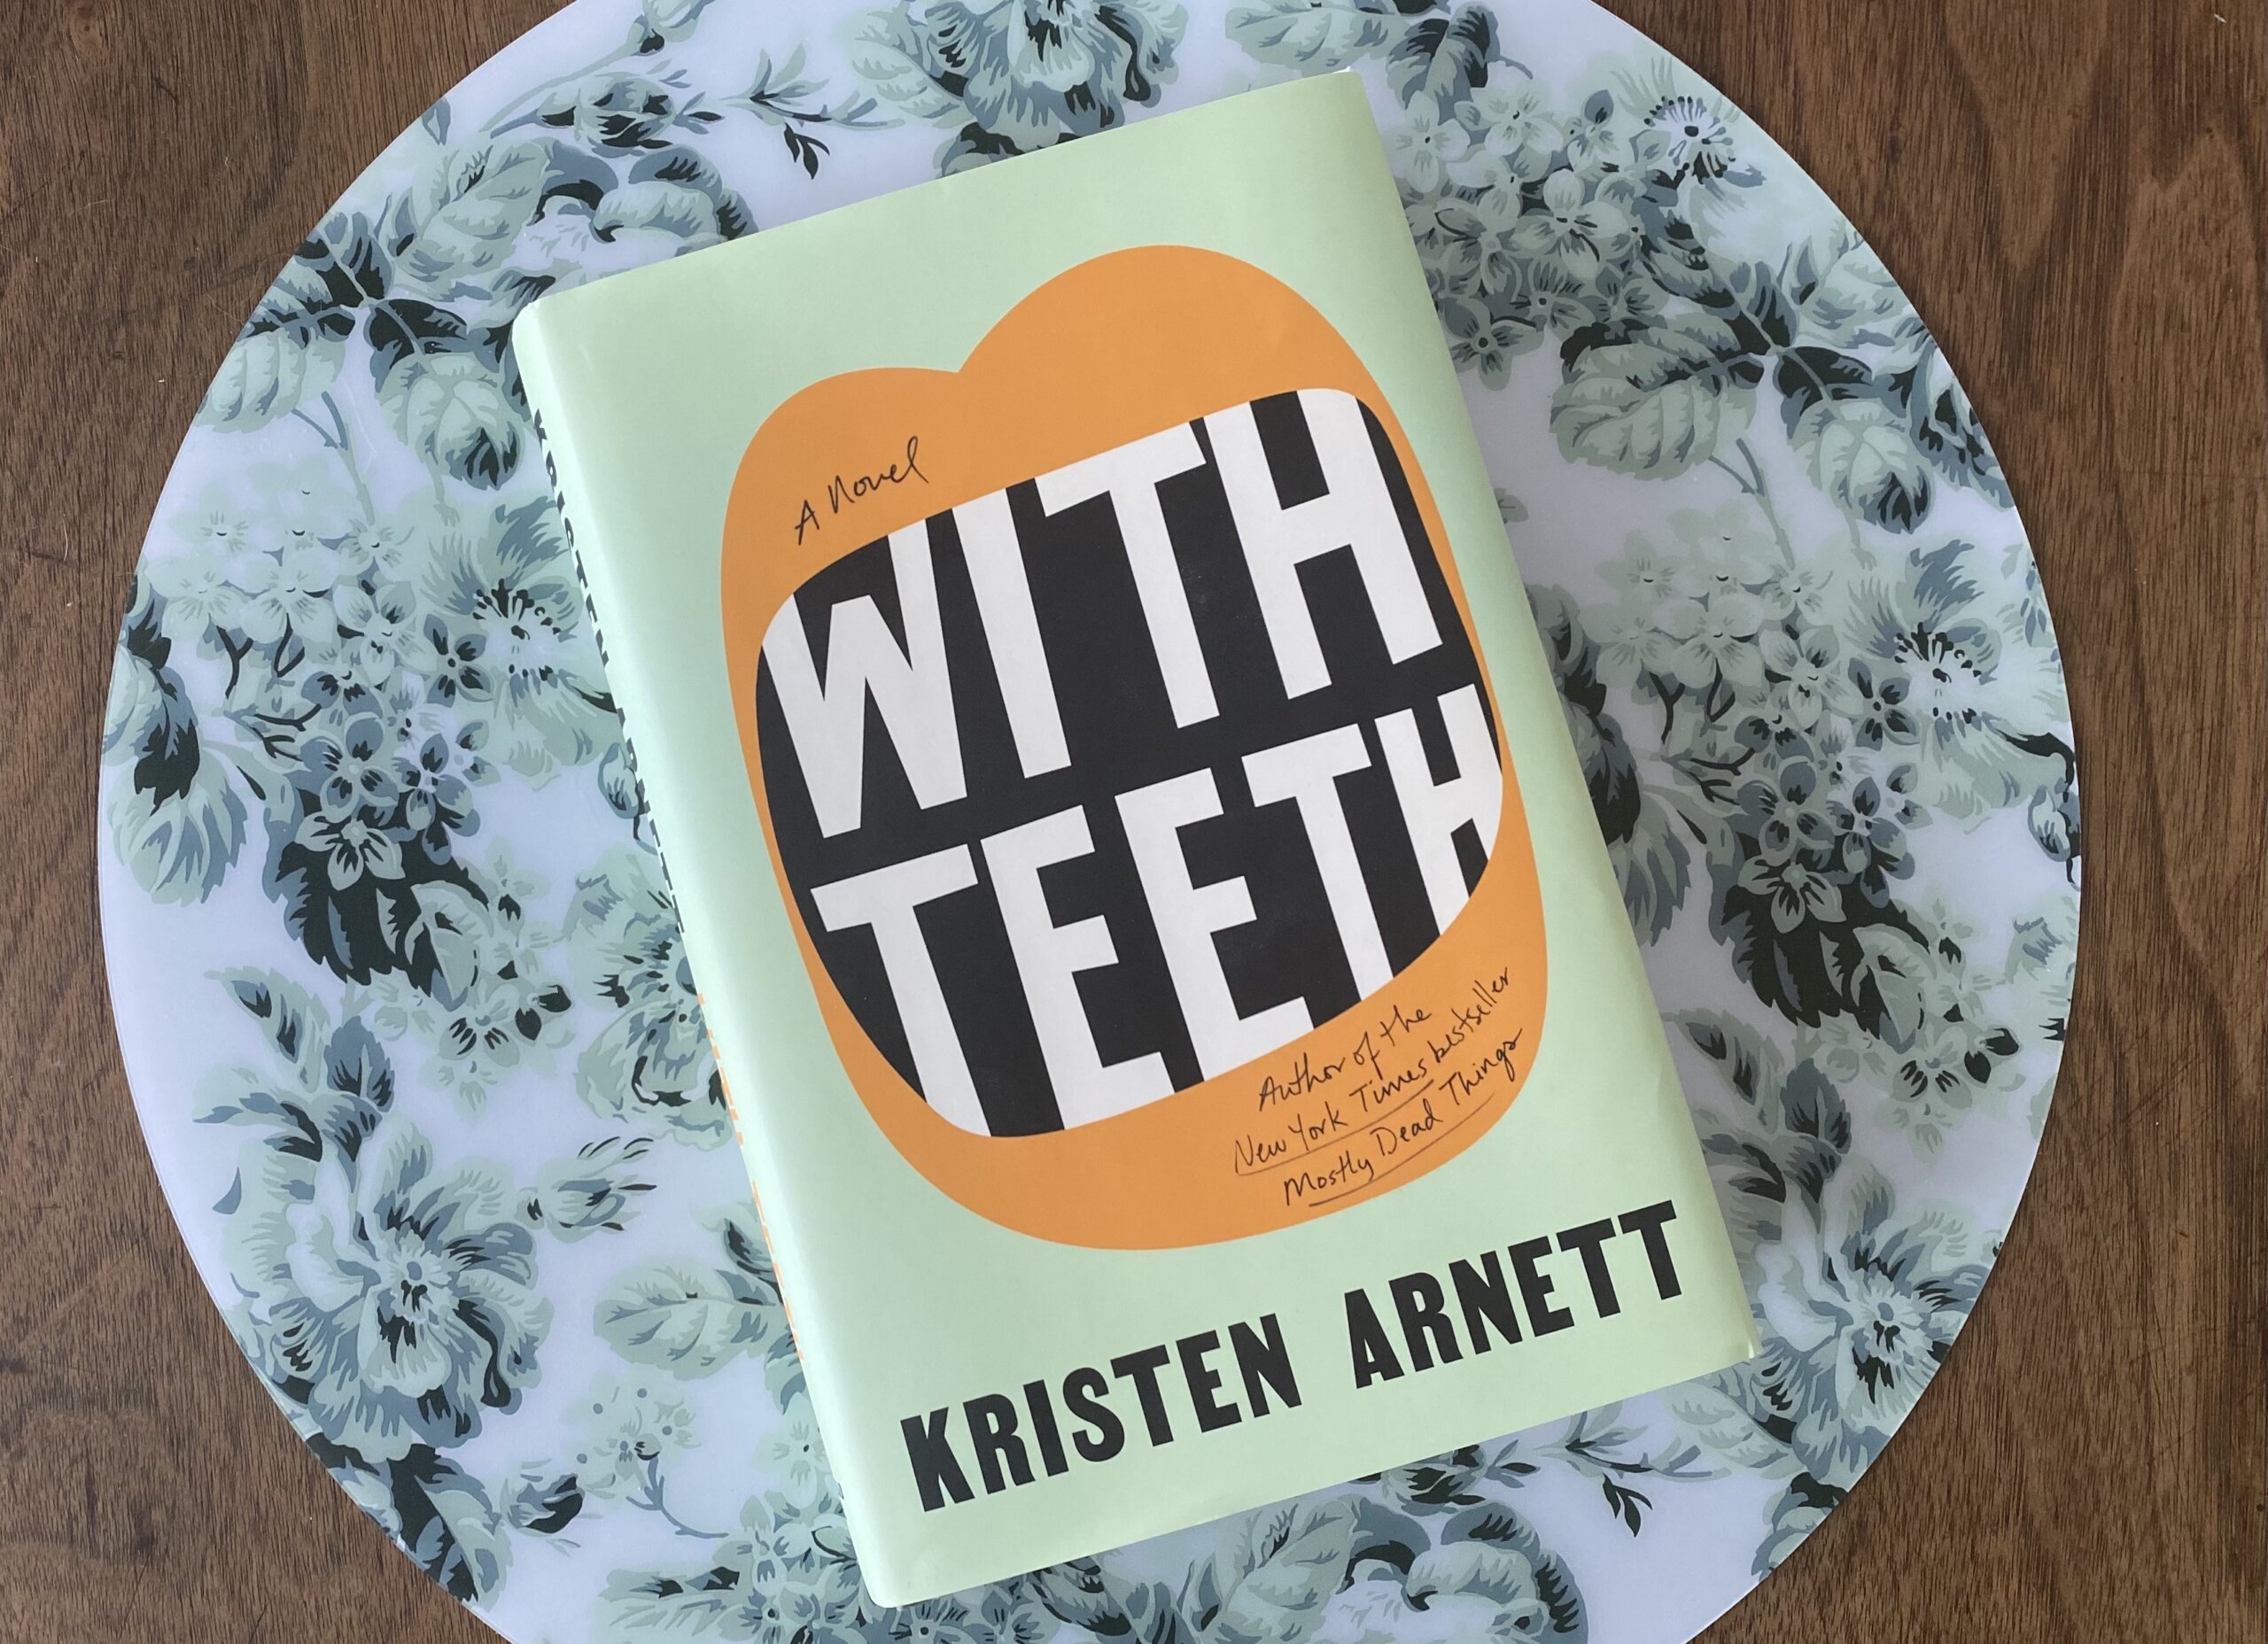 In With Teeth, Kristen Arnett shows that gay moms can be messy too Xtra Magazine picture